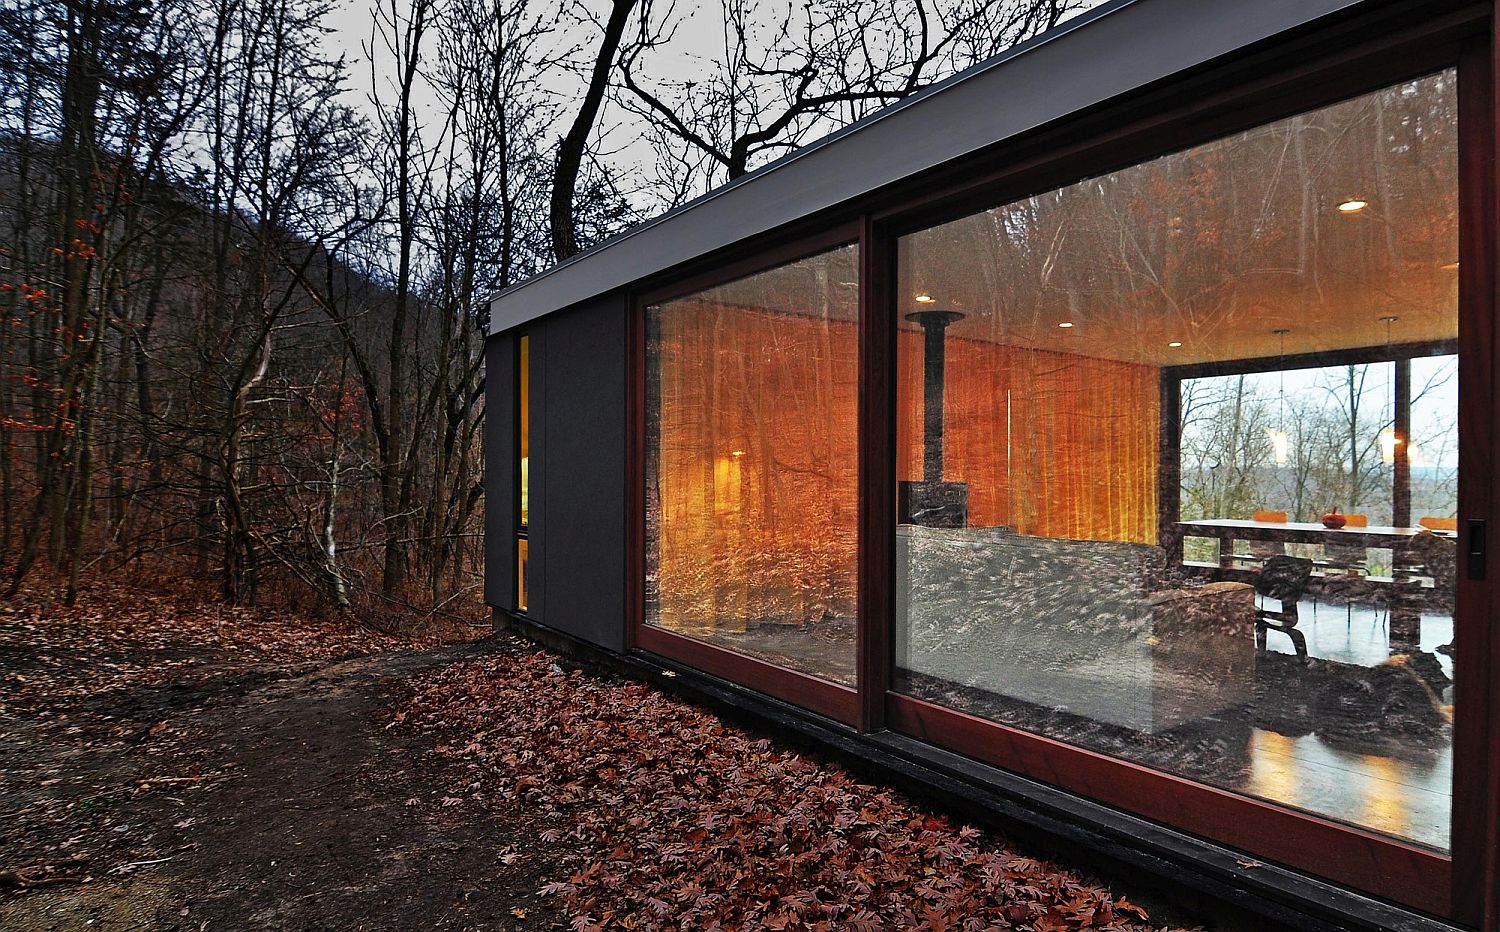 Sliding-glass-doors-connect-the-interior-with-the-landscape-outside